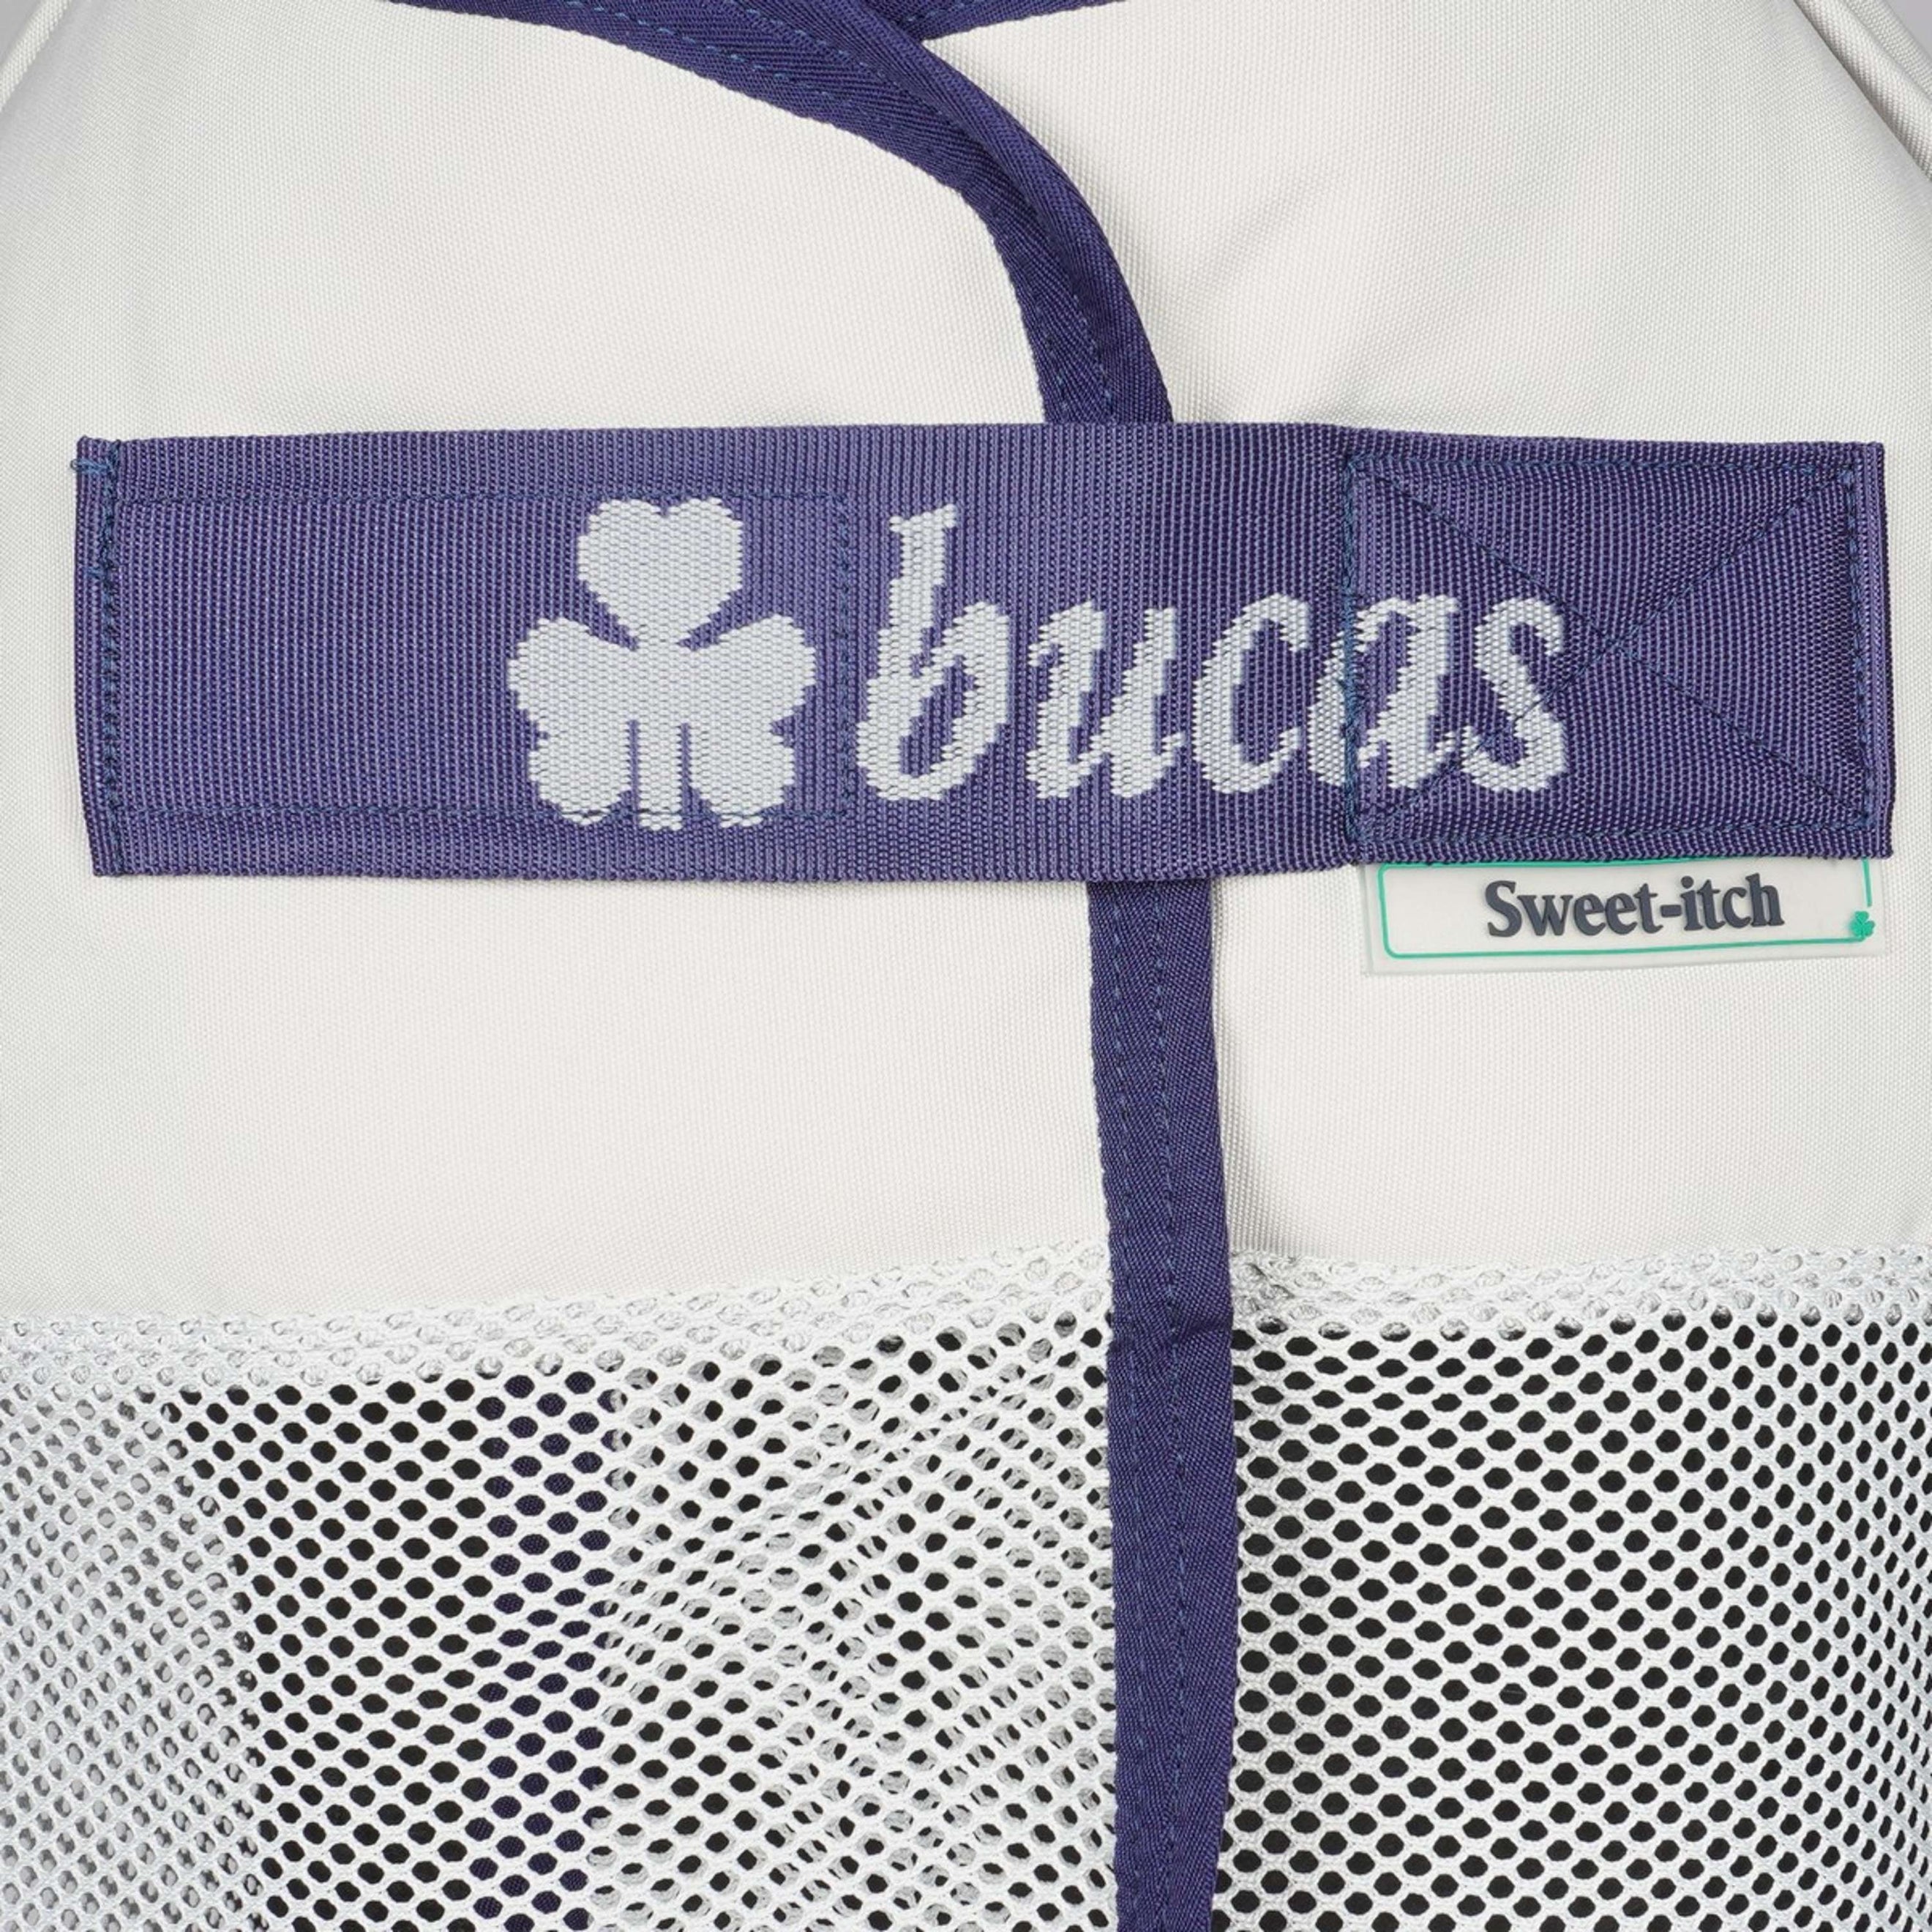 Bucas Couverture Anti-Eczema Sweet-Itch X Argent